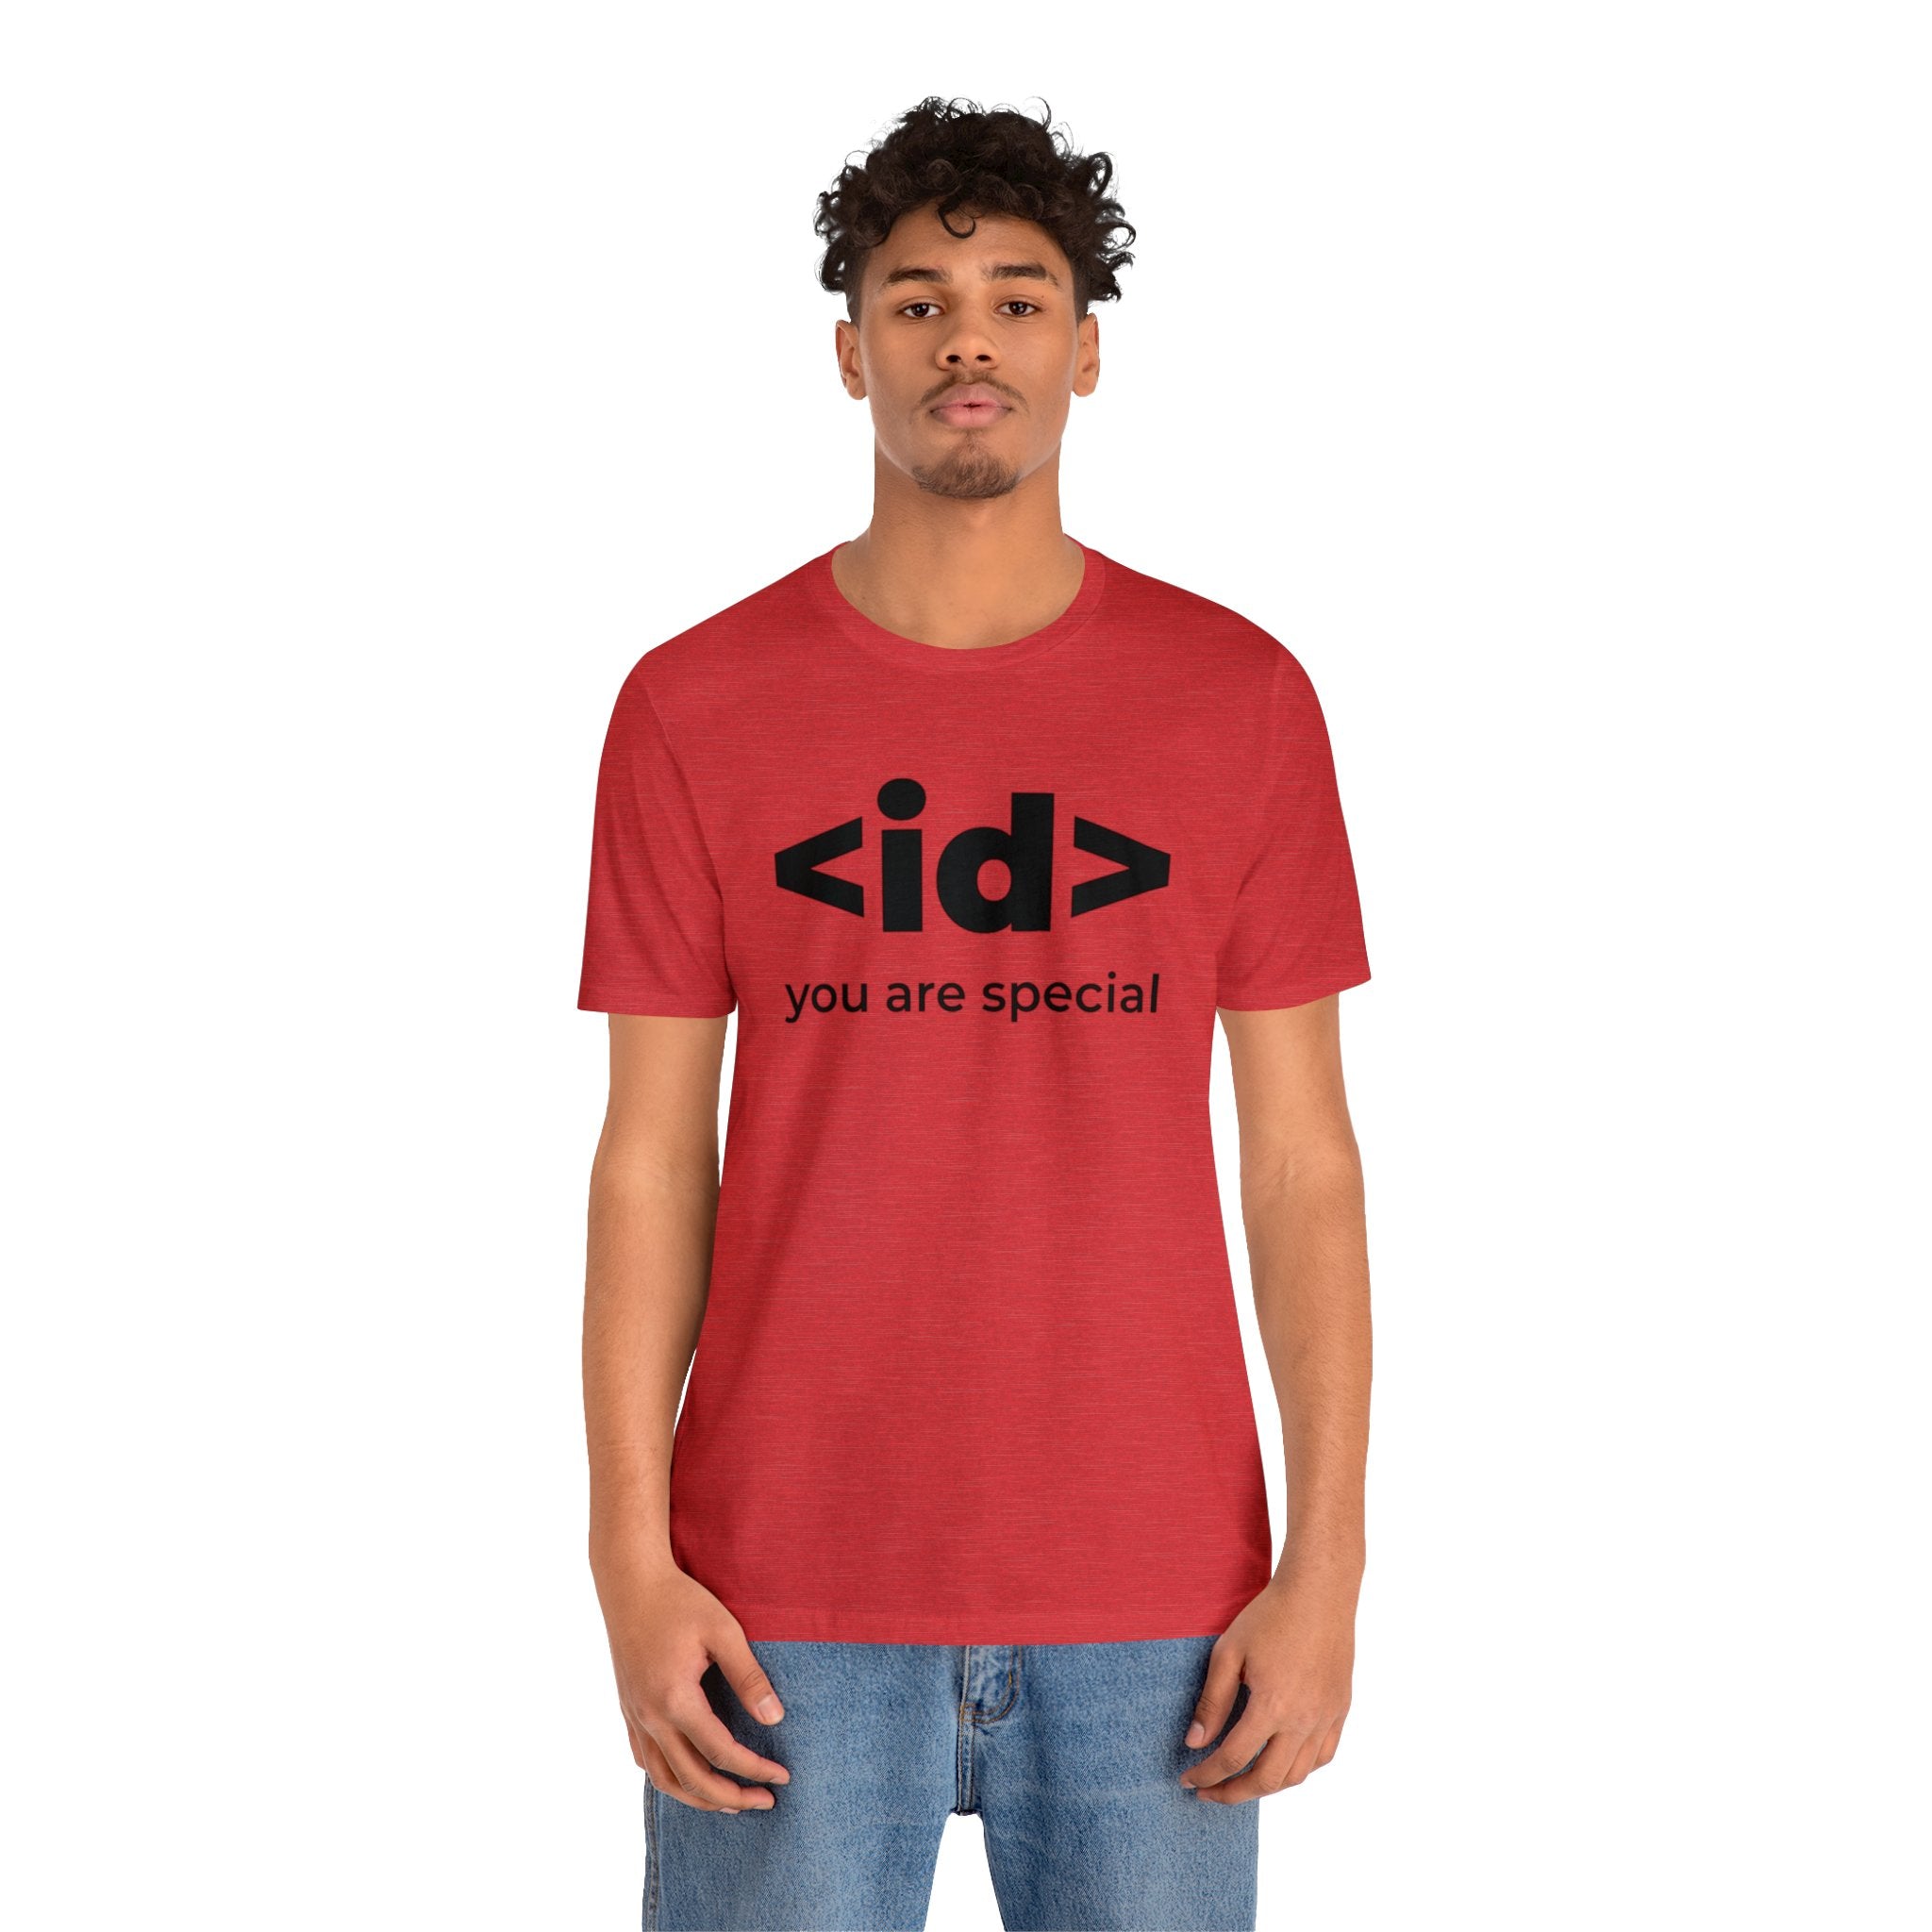 A man in a red <id> You Are Special T-shirt exudes brilliance.